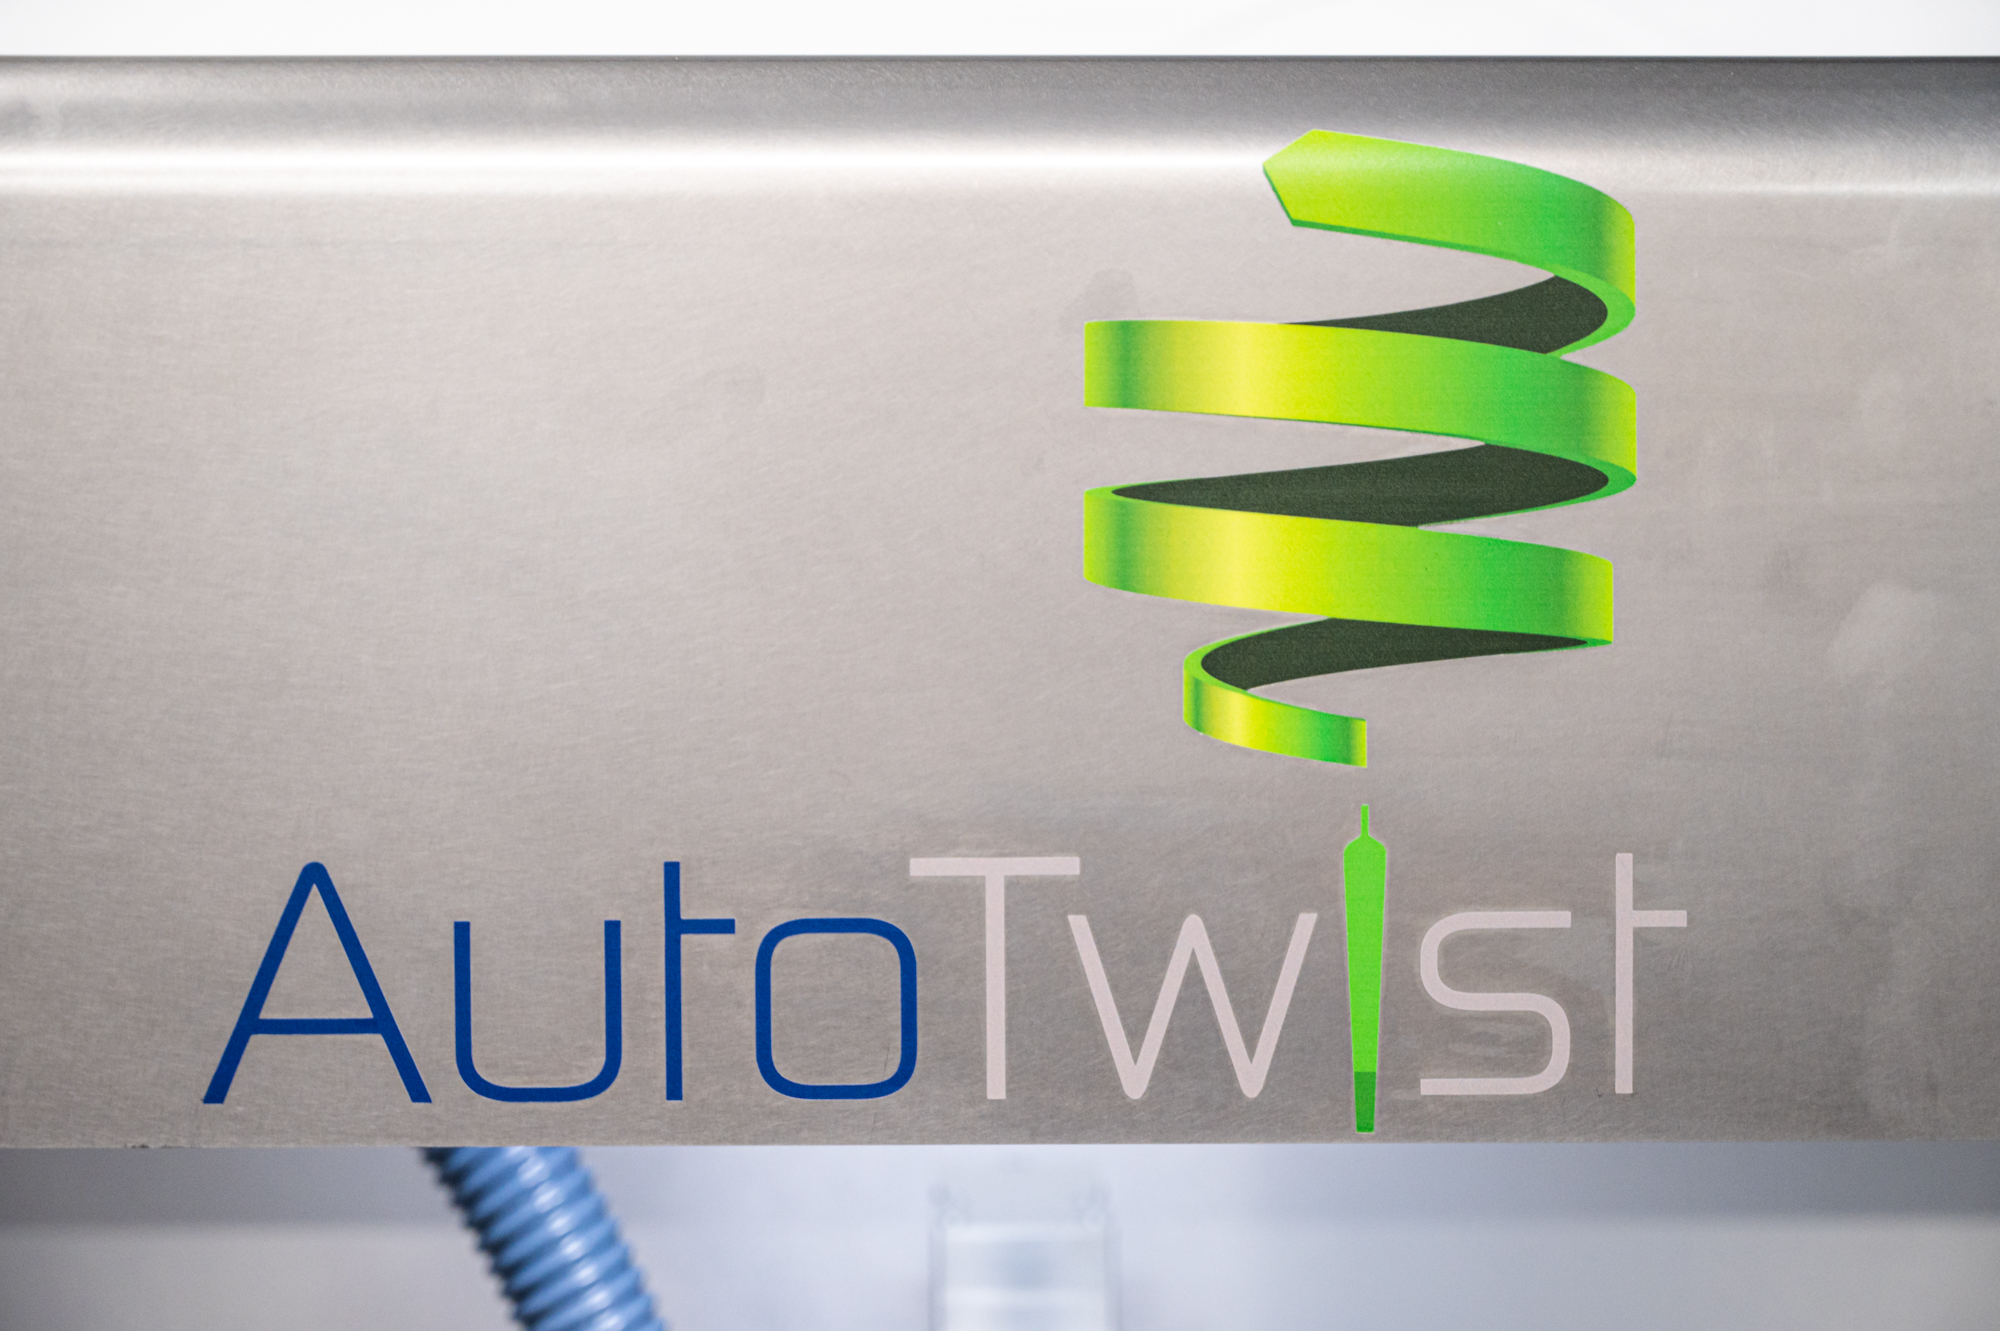 AutoTwist logo, featuring the letter 'I' stylised as a twisted pre-rolled joint or cigarette